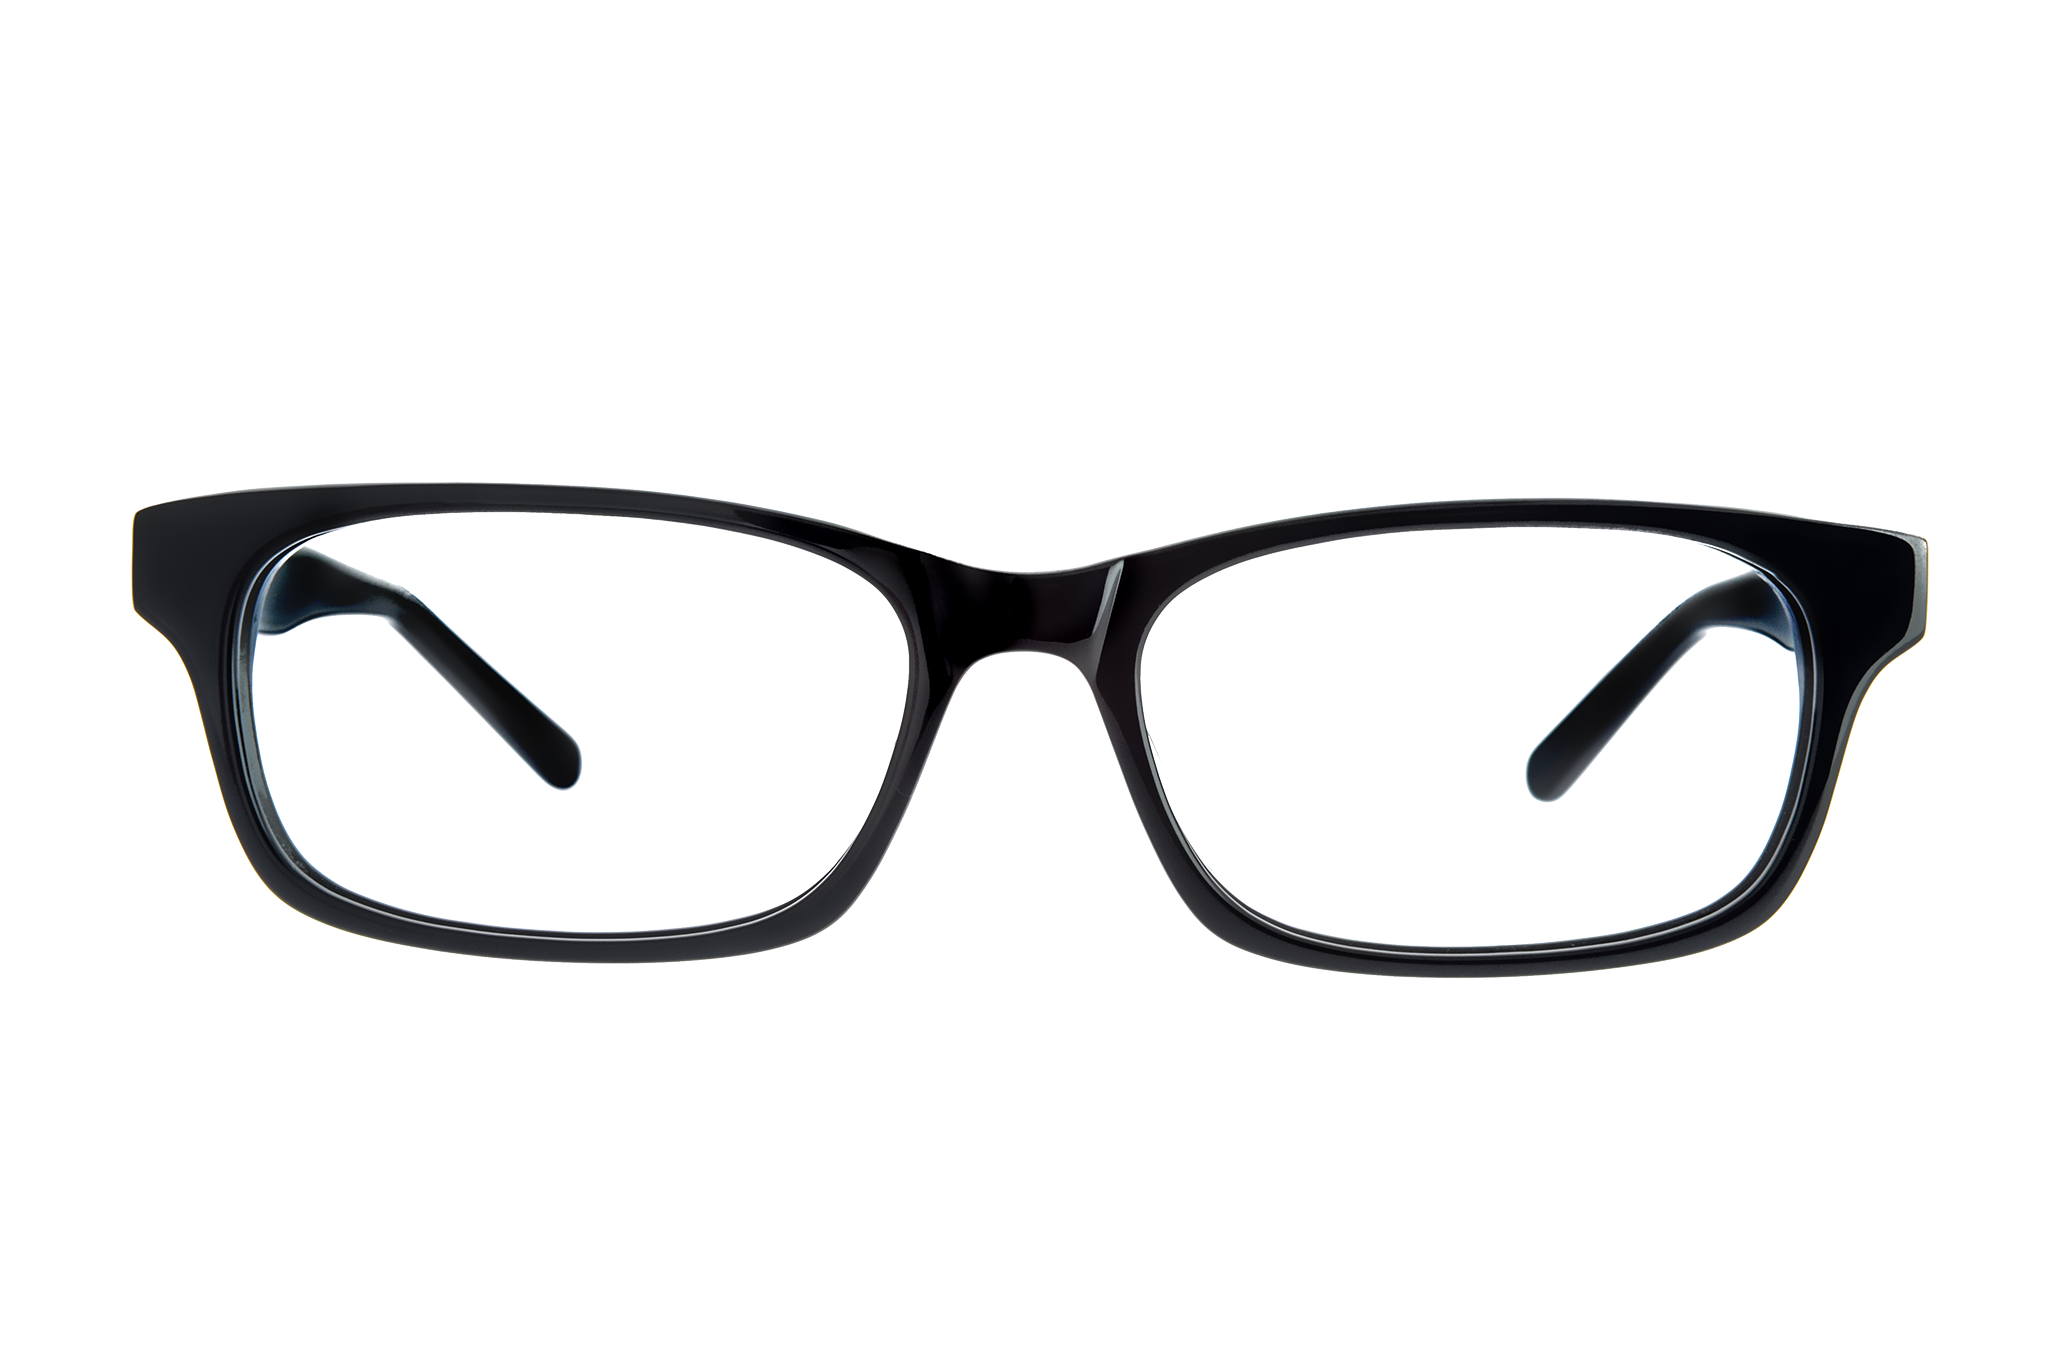 Spectacles Png